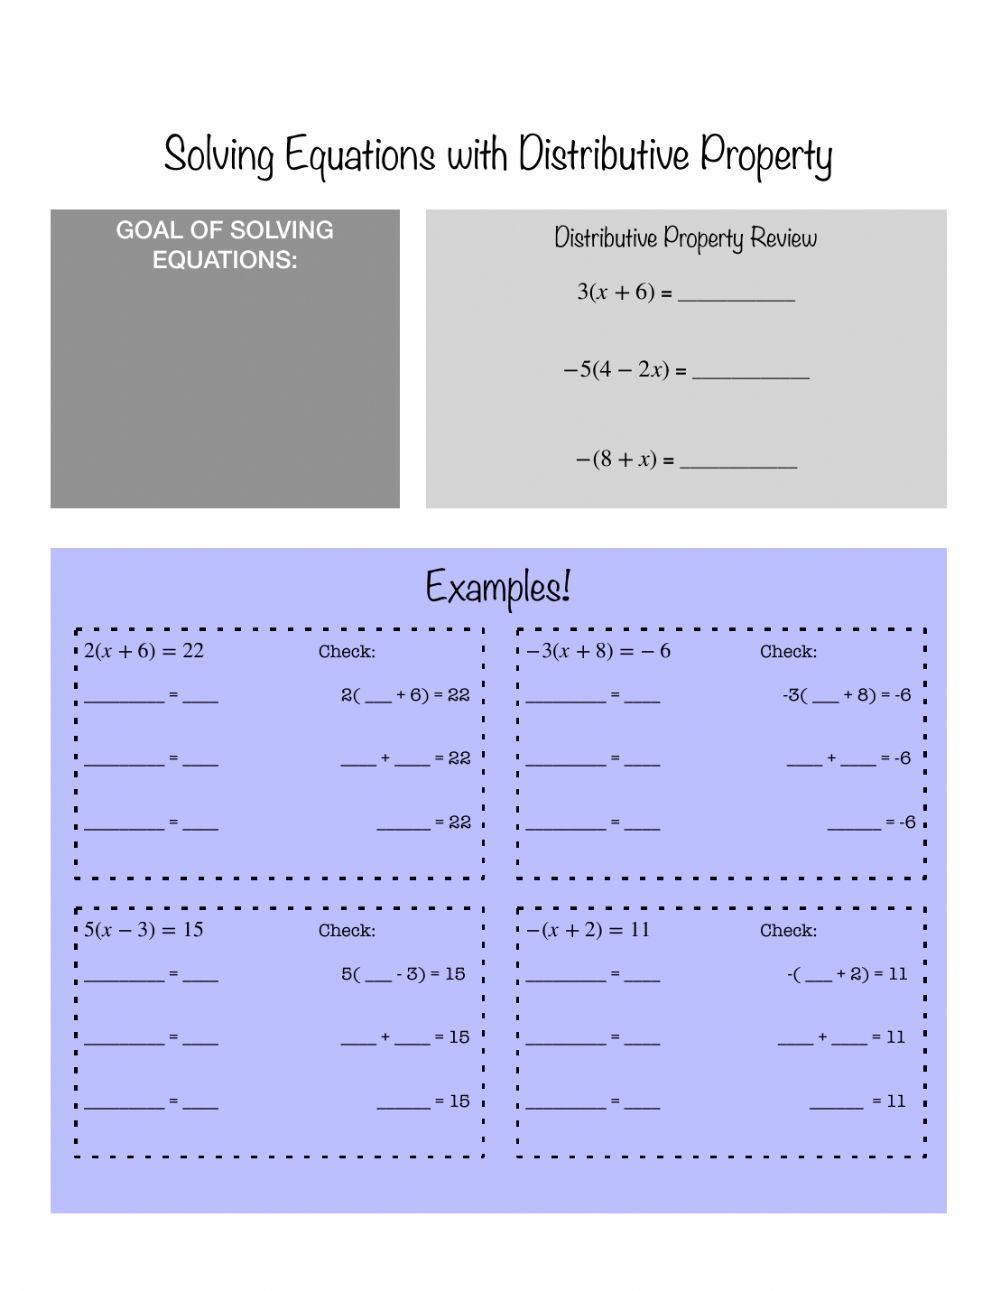 Solving Equations with Distributive Property Notes (algebra)